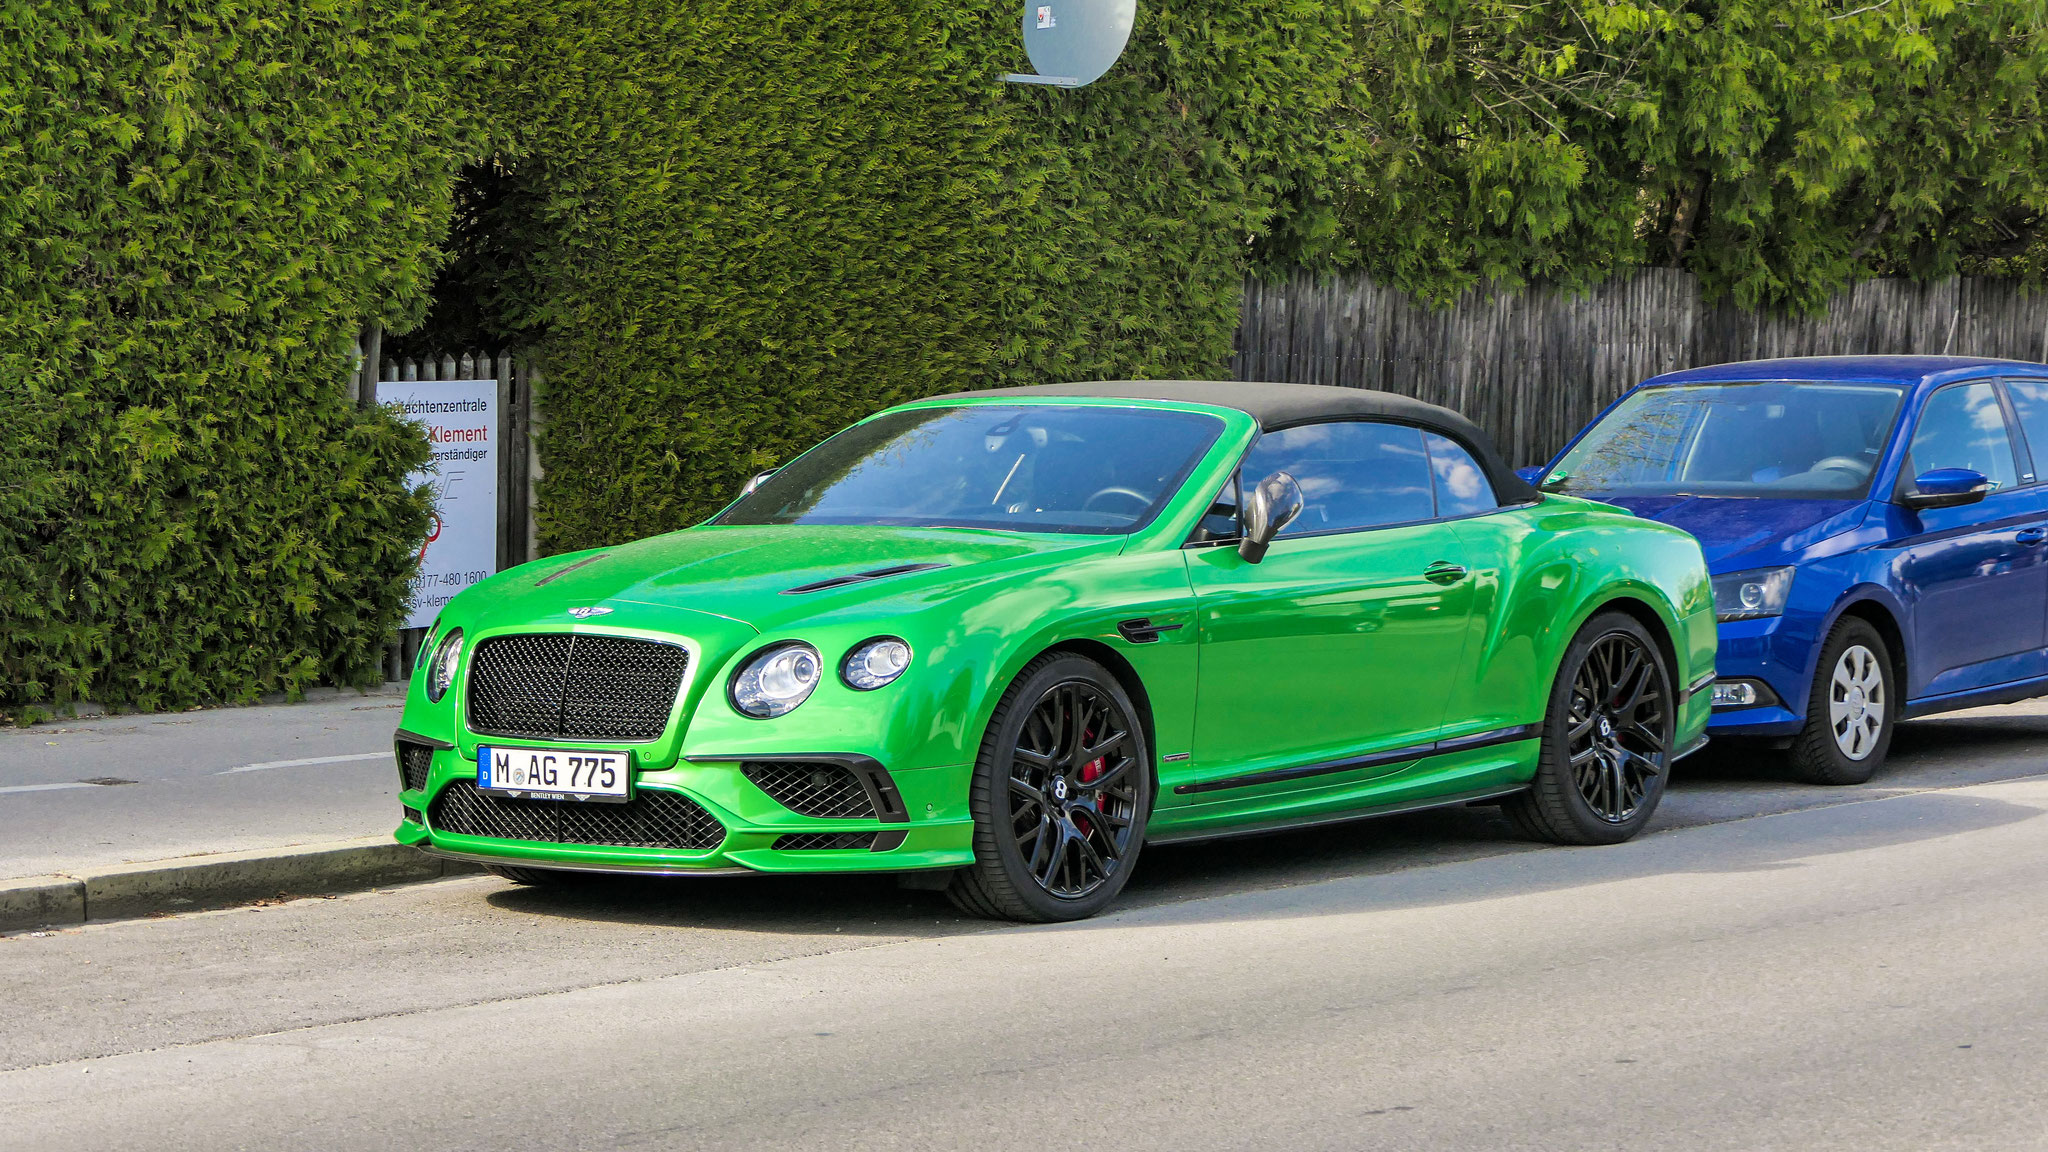 Bentley Continental GTC Supersports - M-AG-775